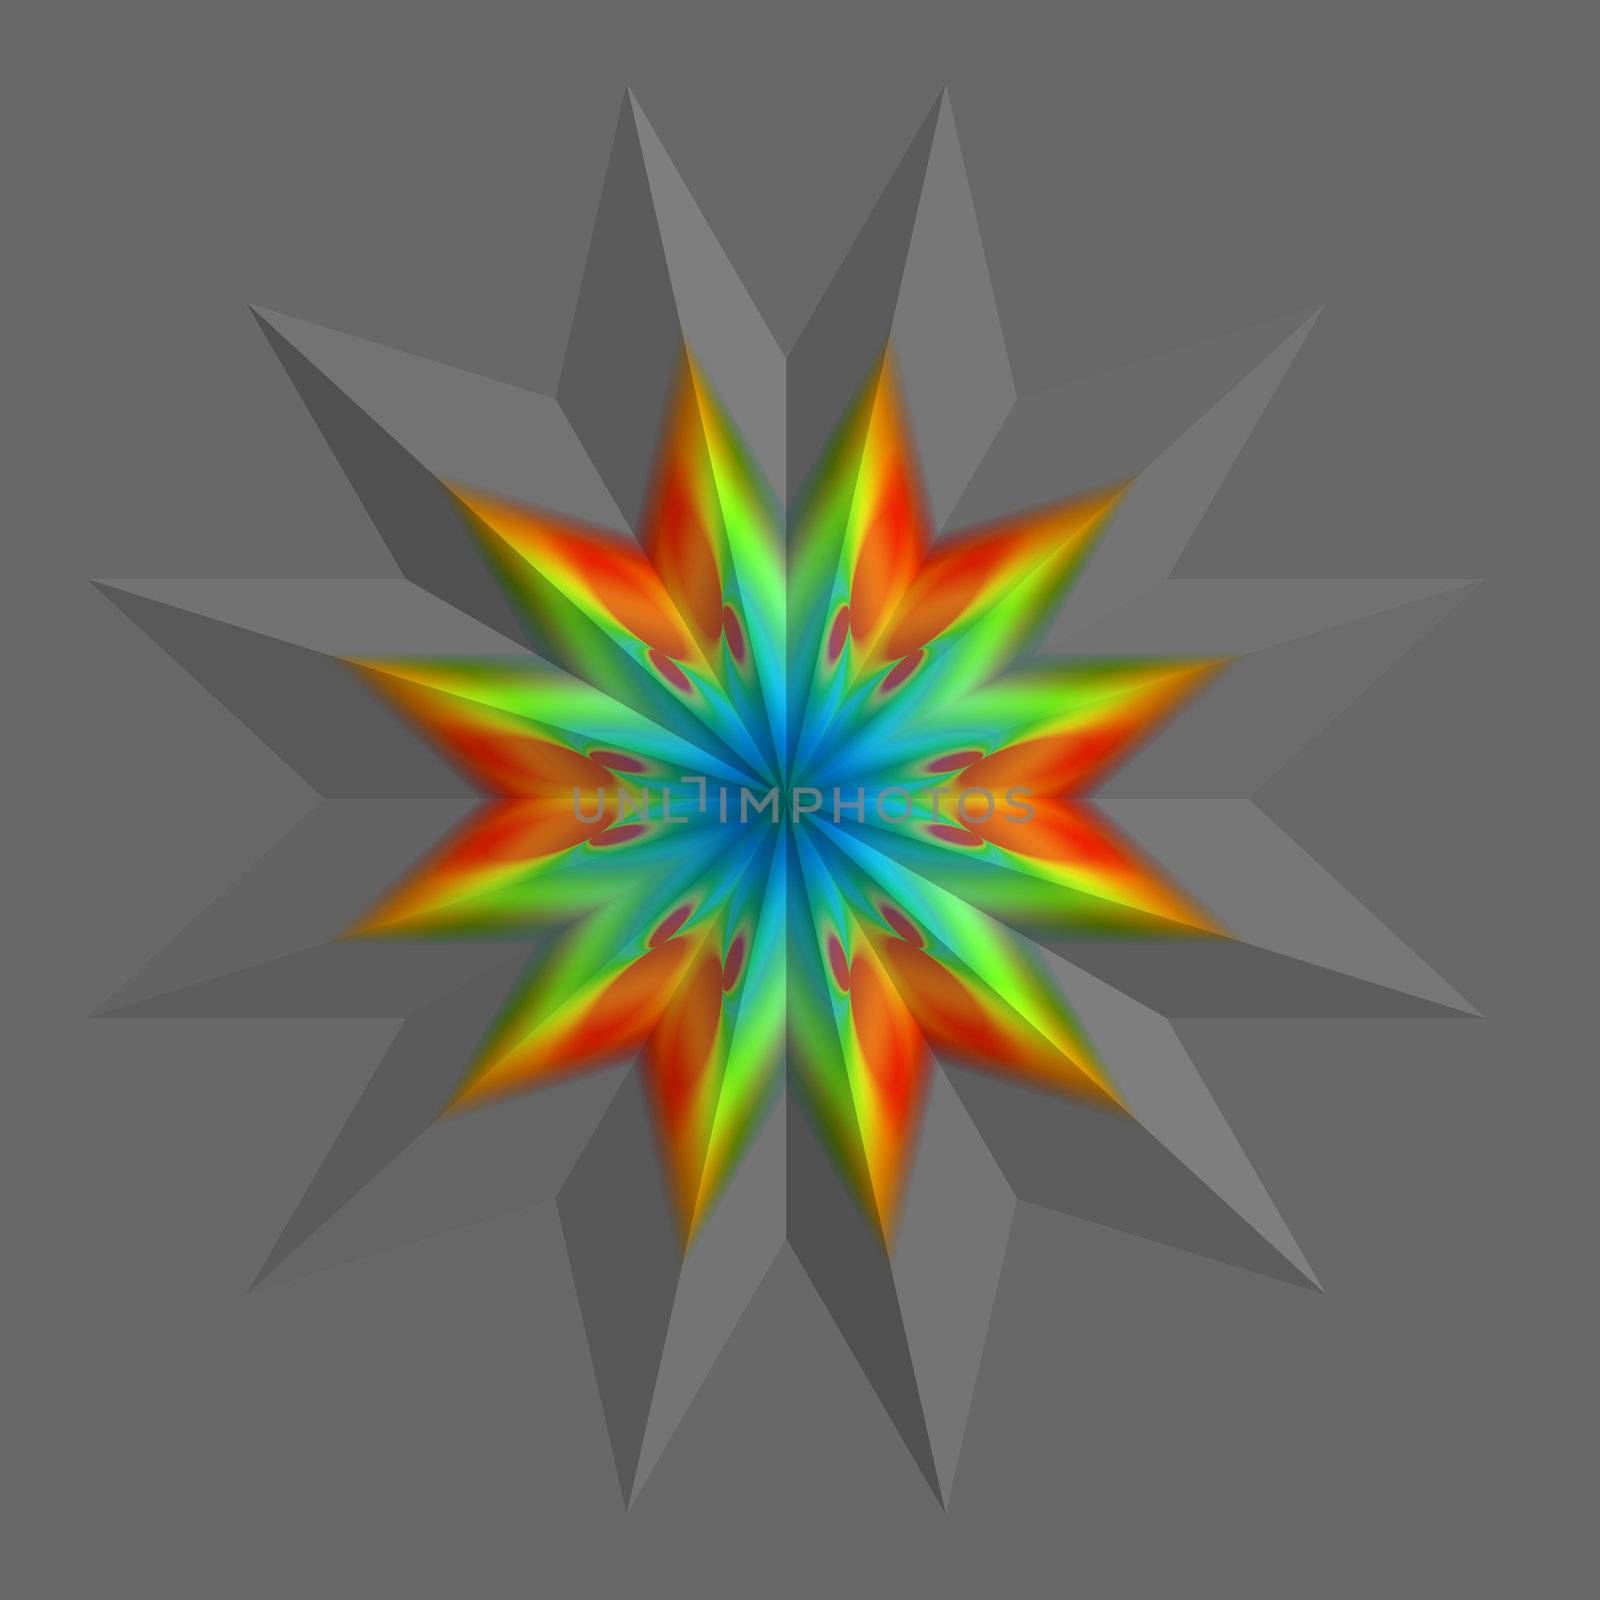 An abstract rainbow colored star on a gray background.